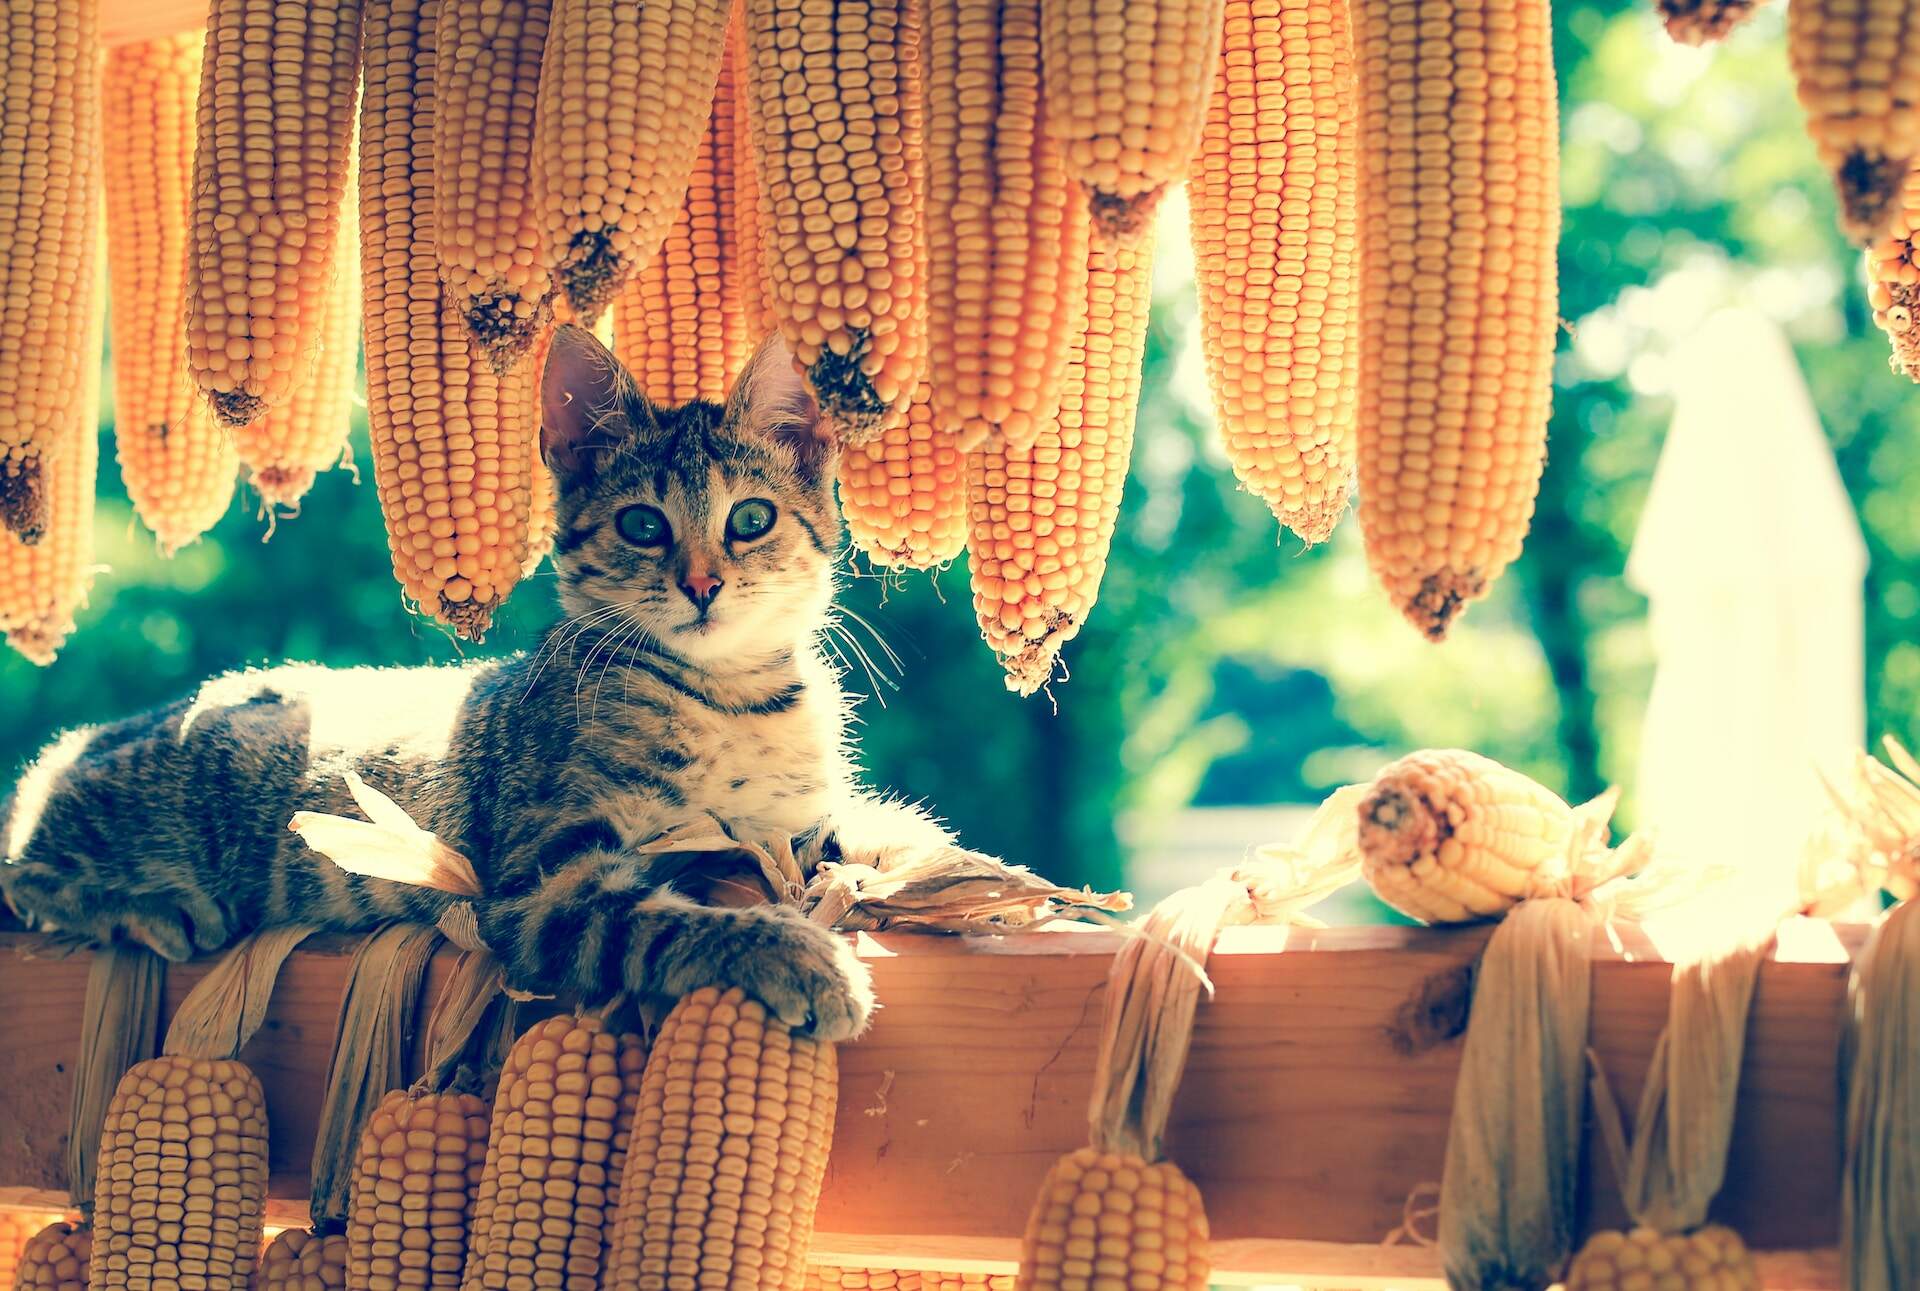 A cat sitting by hanging corn cobs